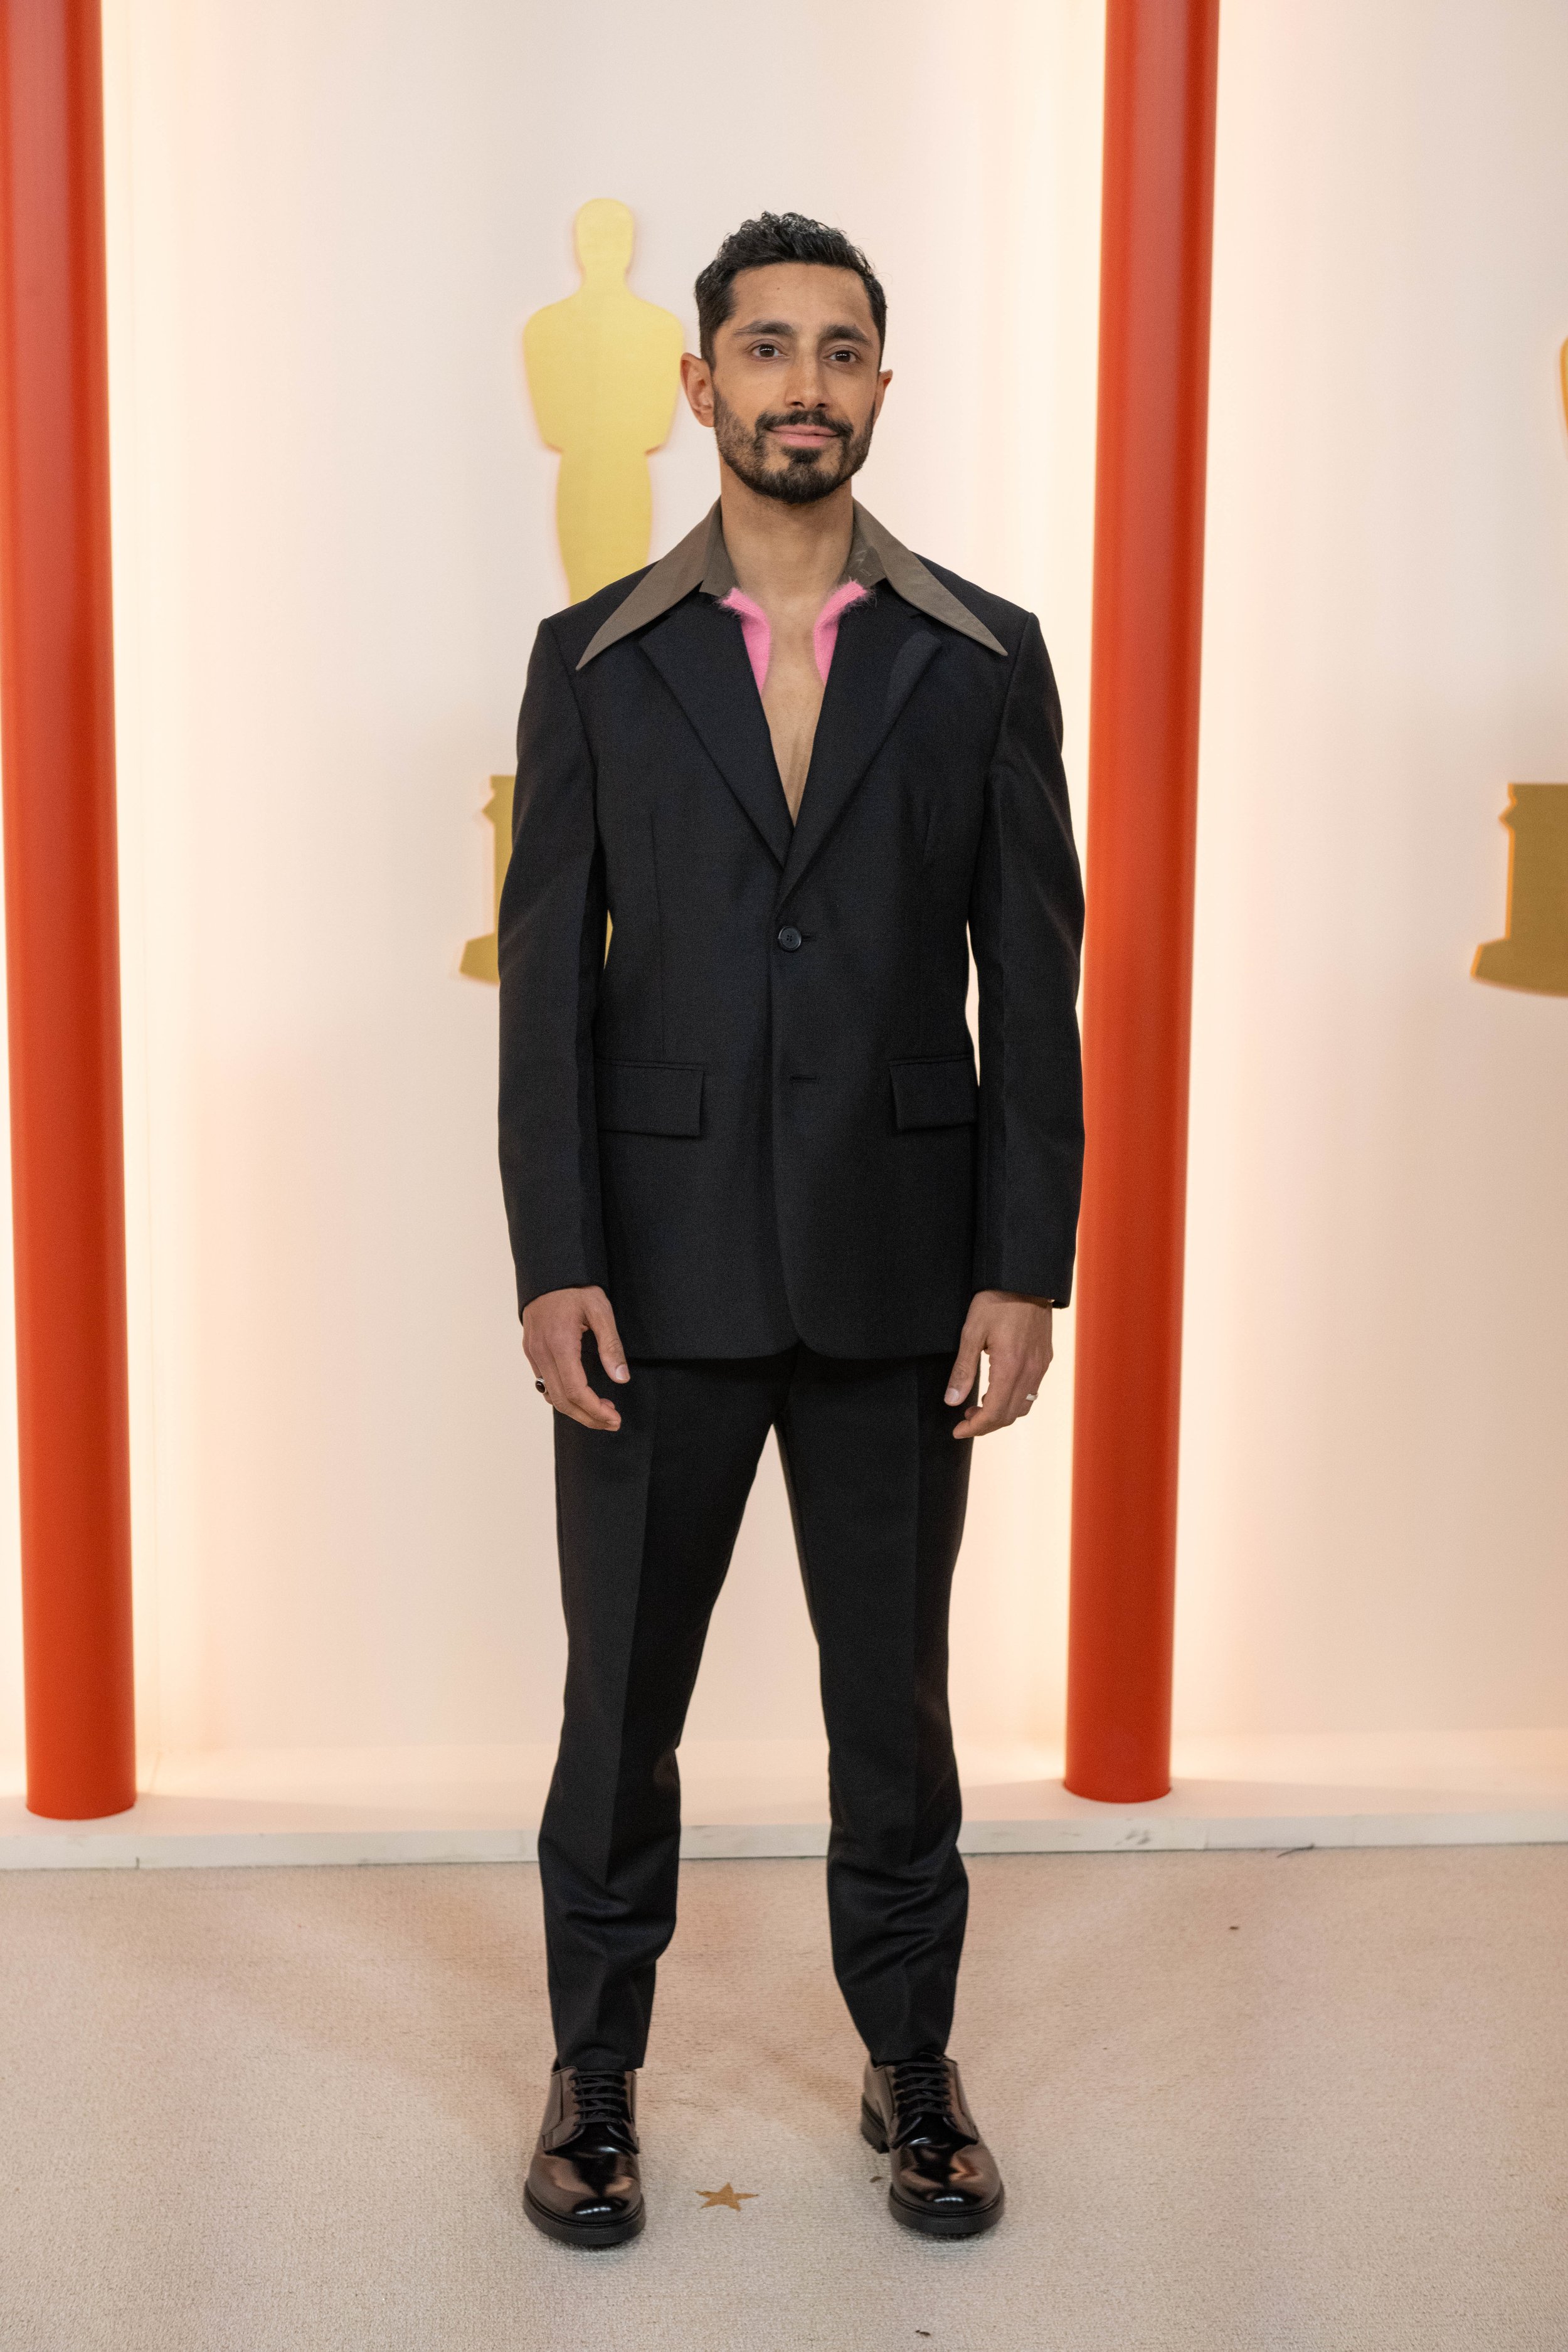 Riz Ahmed arrives on the red carpet of the 95th Oscars